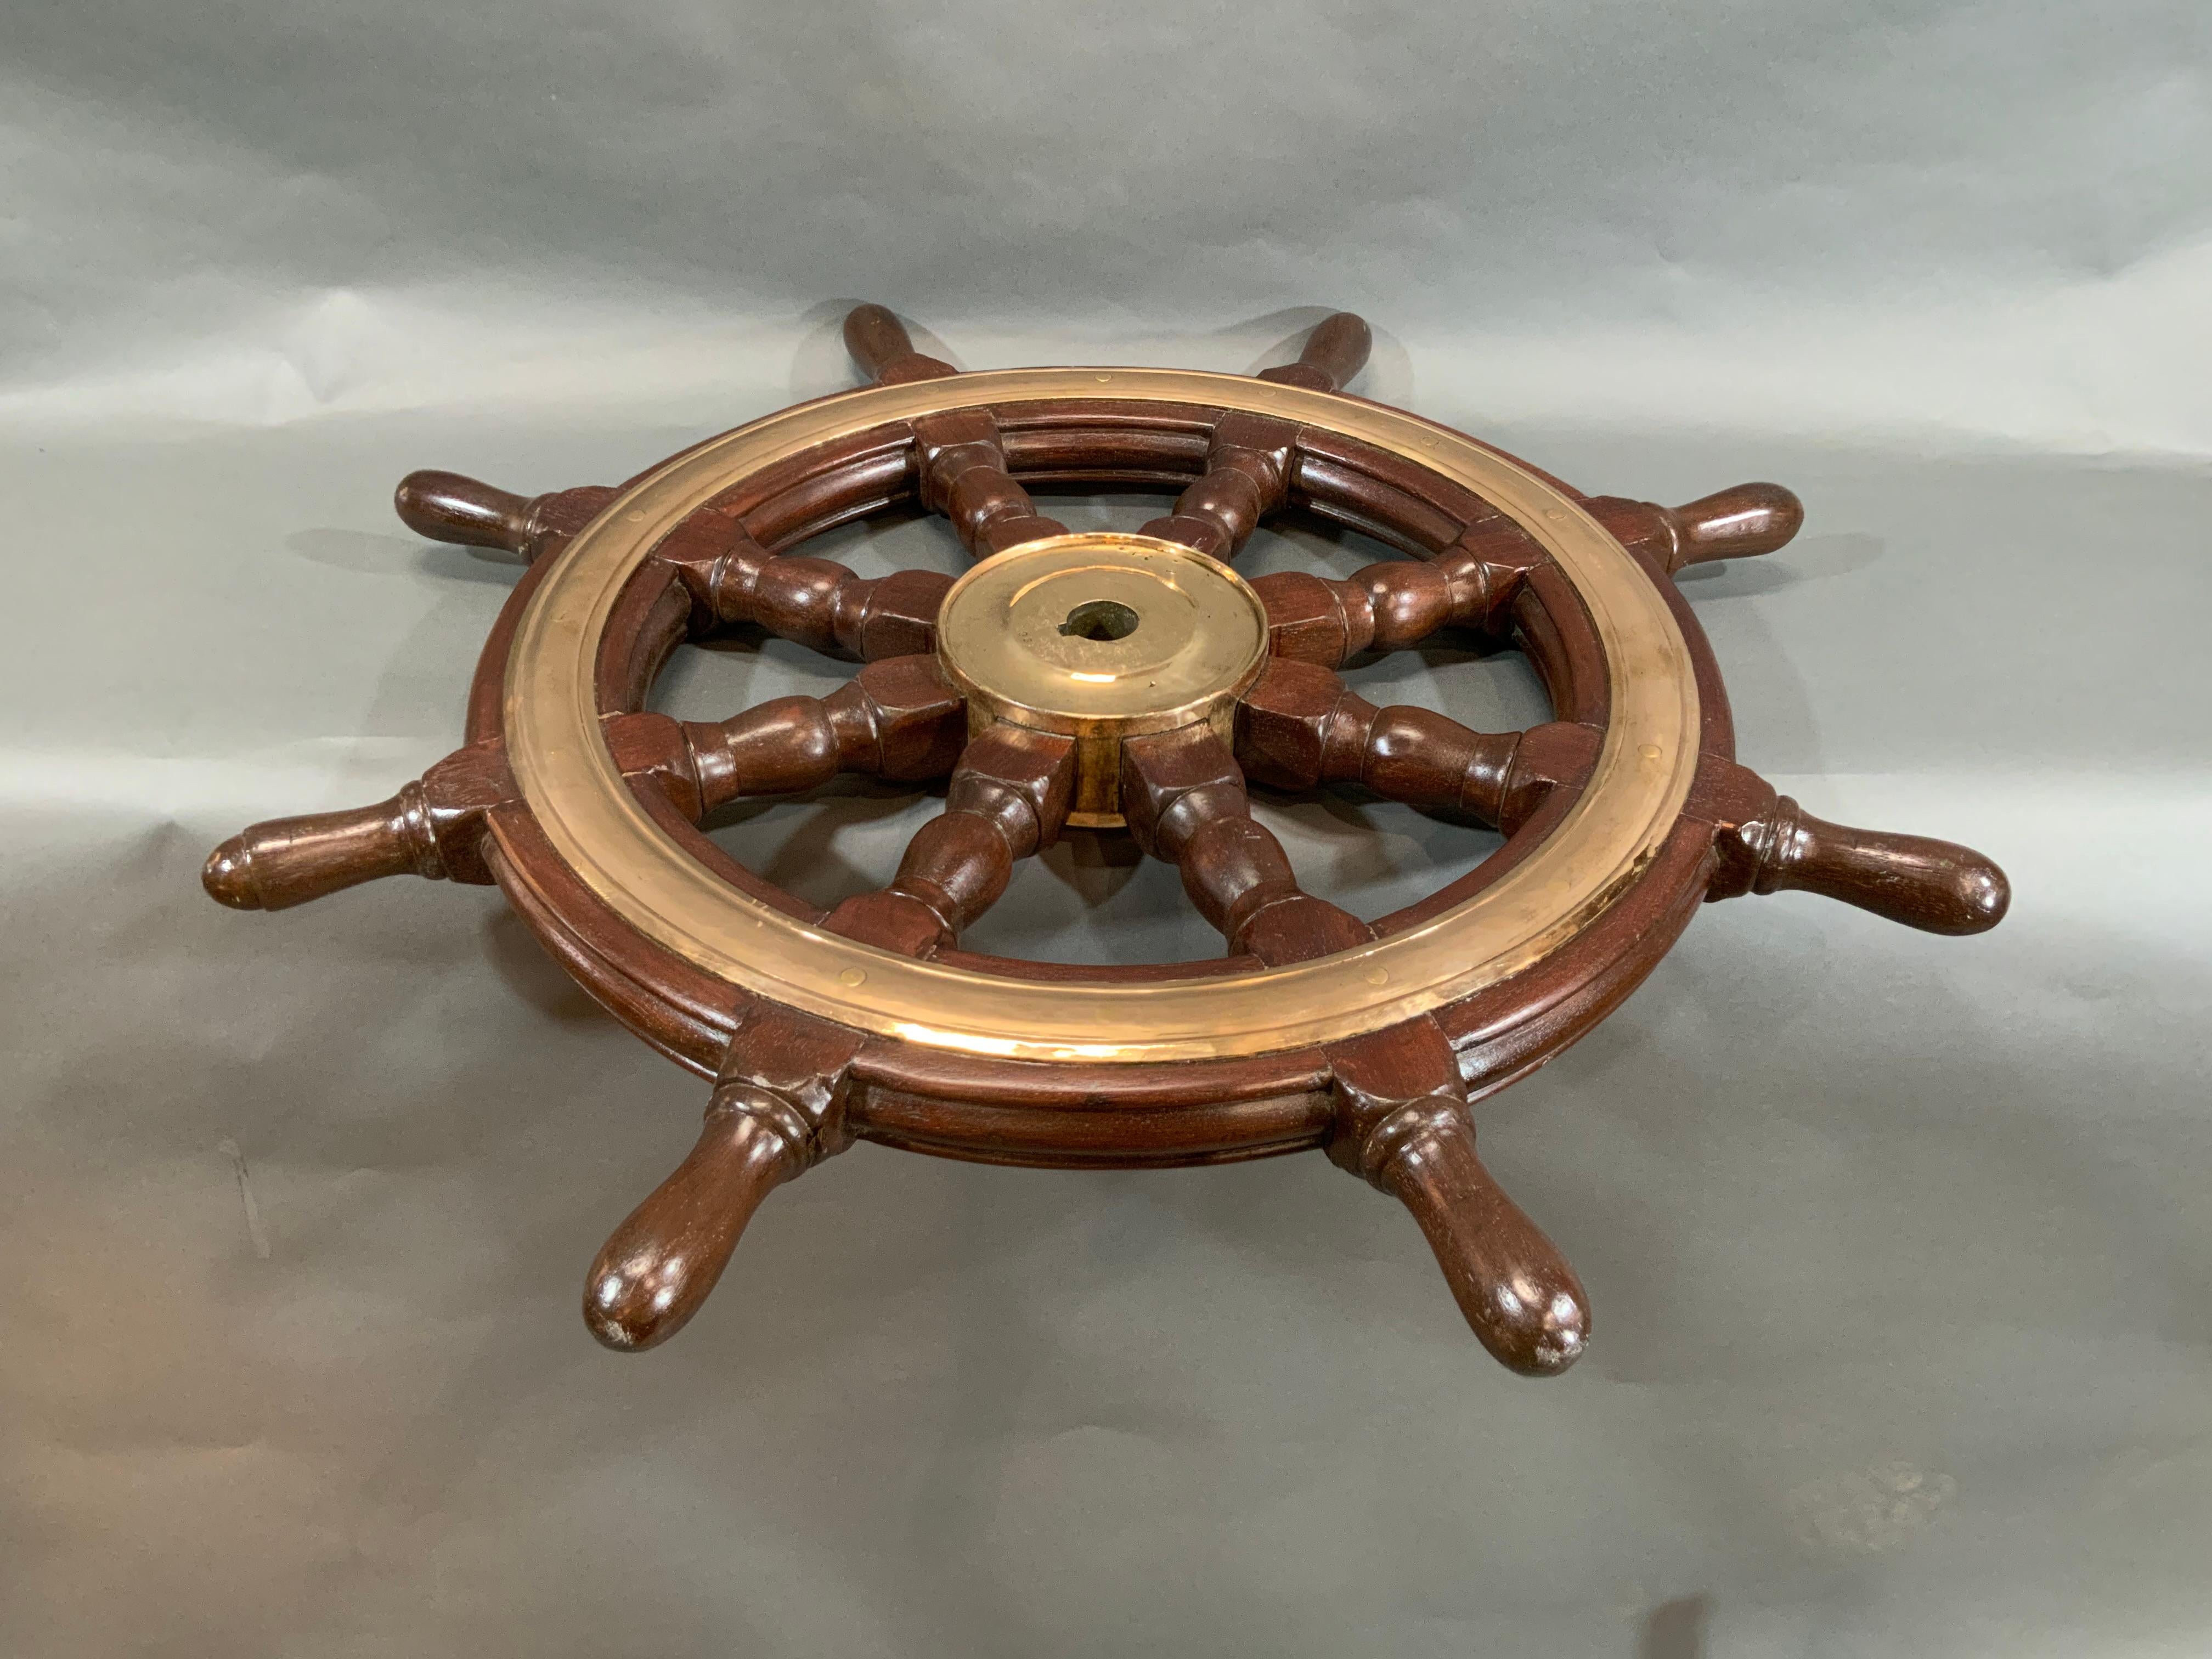 Eight Spoke Ships Wheel with Solid Brass For Sale 2